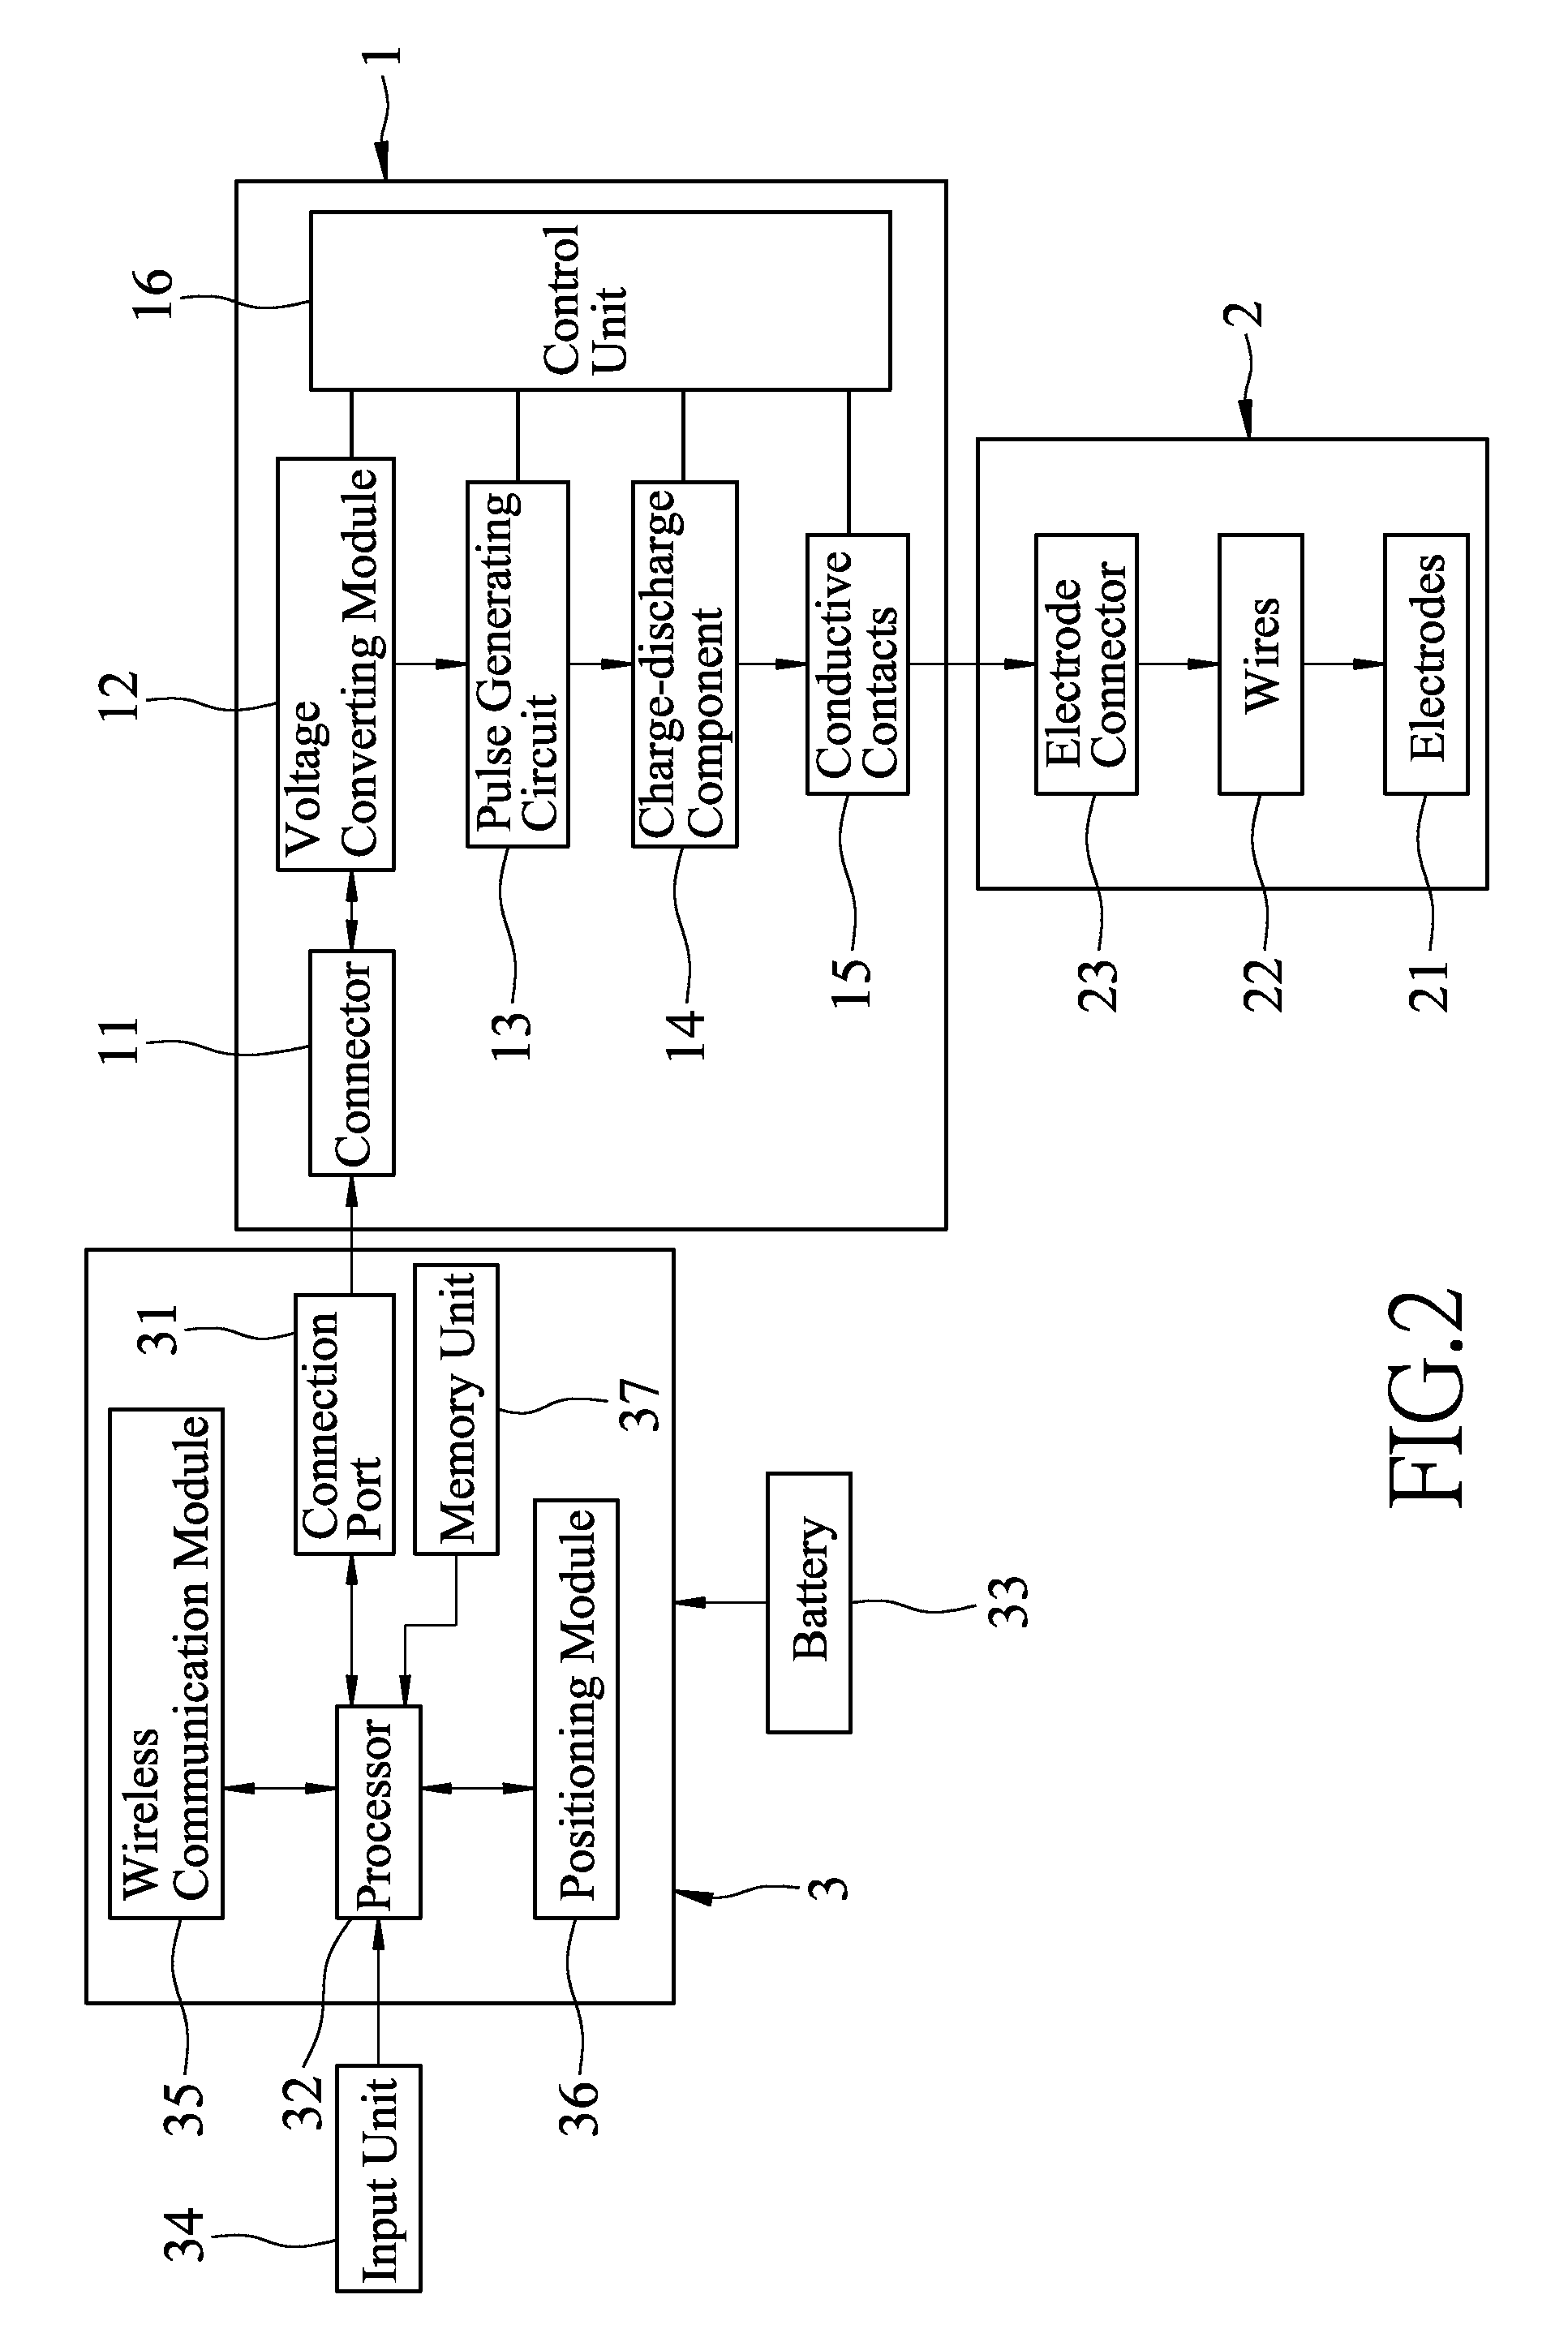 Defibrillation system and method and defibrillator electrode device